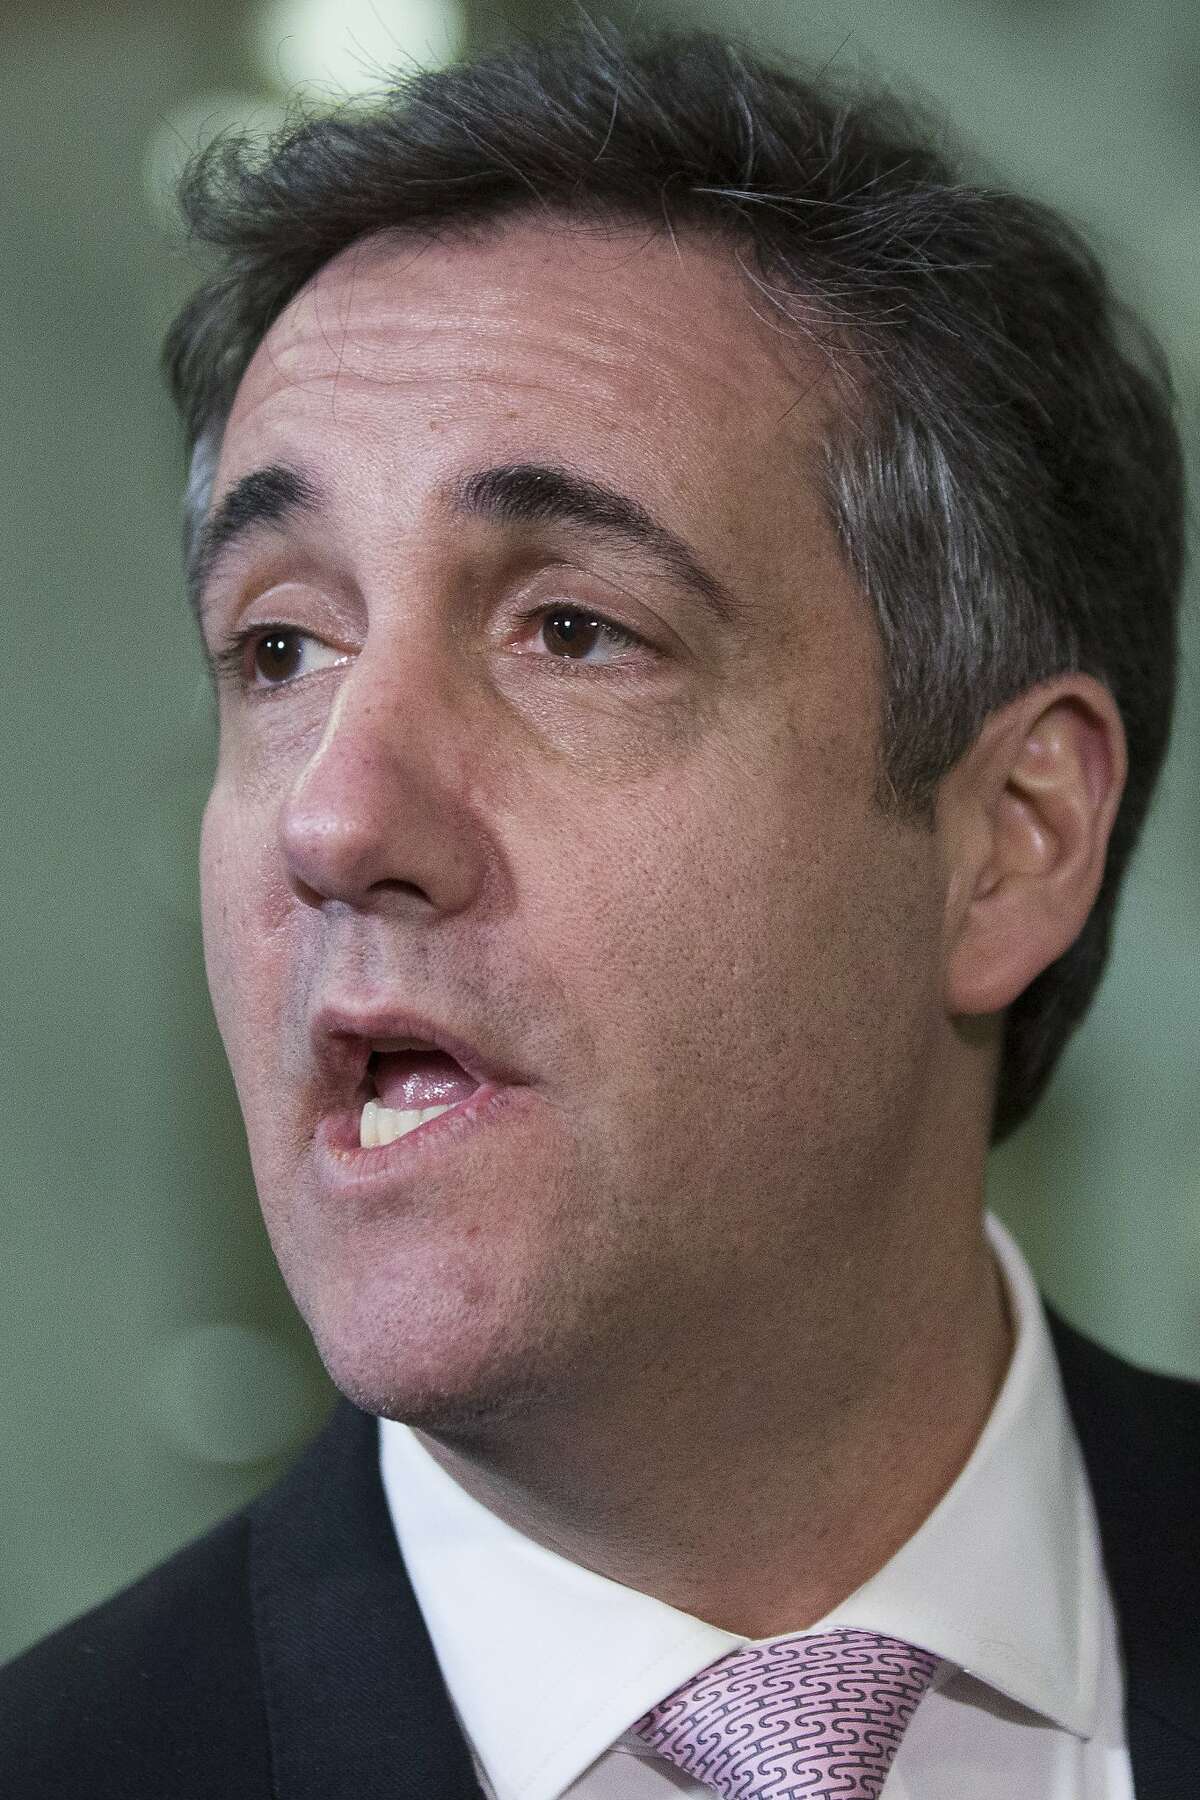 Michael Cohen, President Donald Trump's former lawyer, speaks to the media as he departs after testifying before a closed door hearing of the Senate Intelligence Committee on Capitol Hill, Tuesday, Feb. 26, 2019, in Washington. Click through the gallery for reactions to his comments on Thursday.